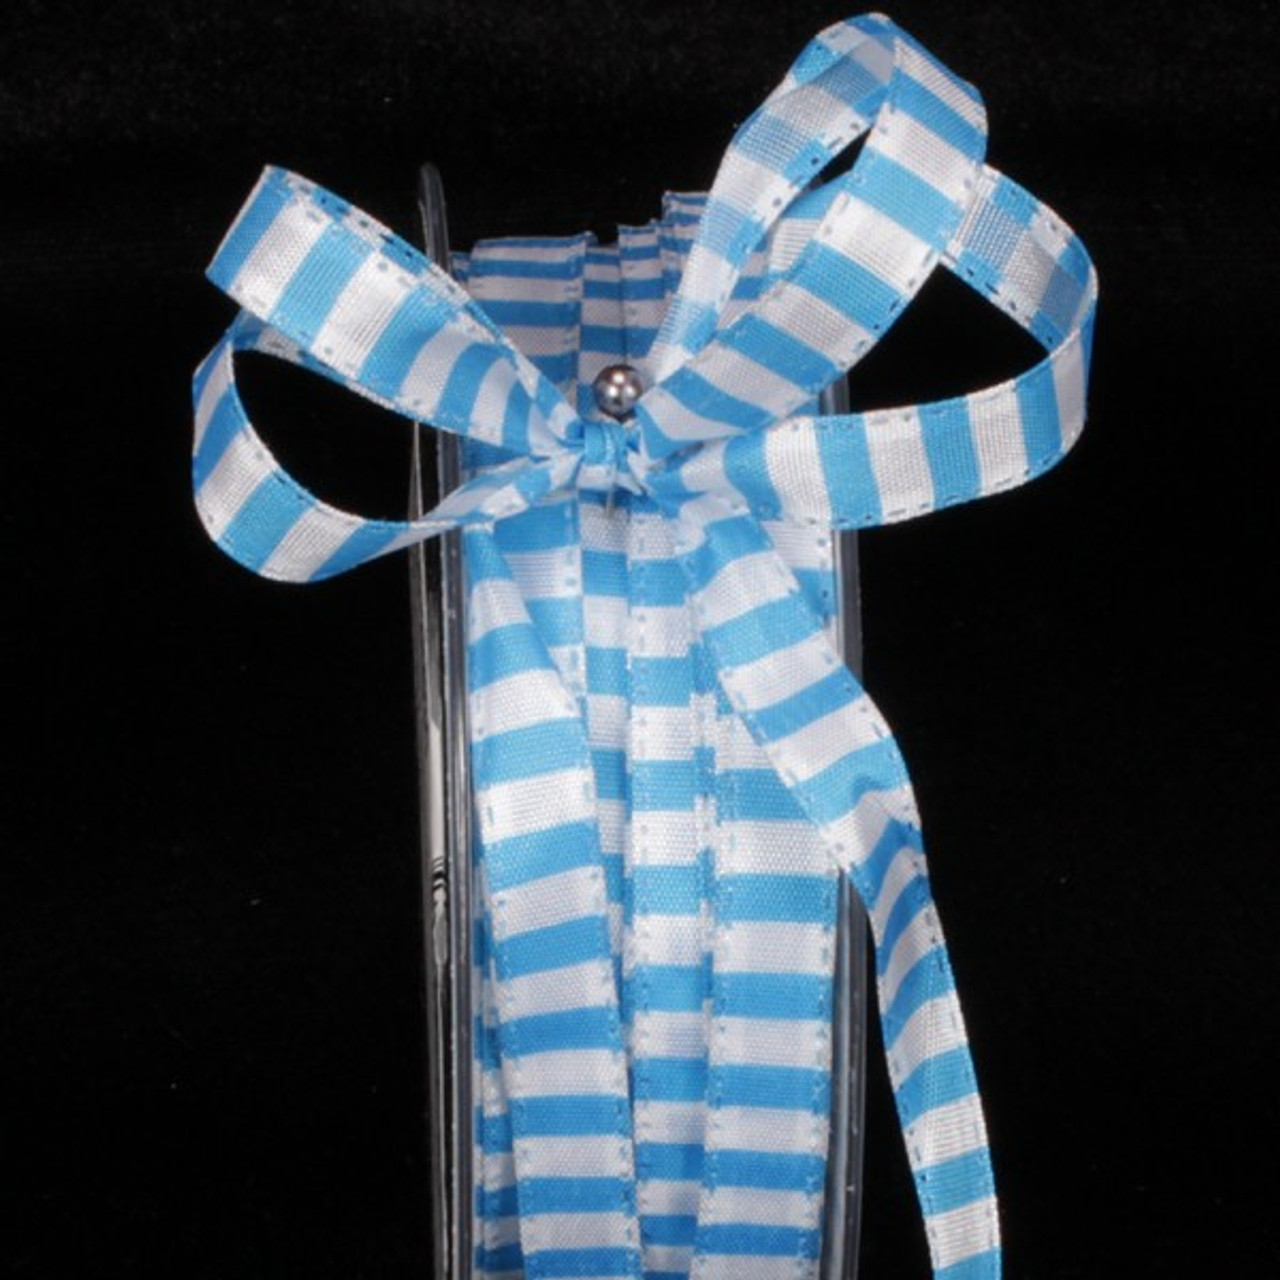 Celebrate It Wired Checkered Ribbon - Each